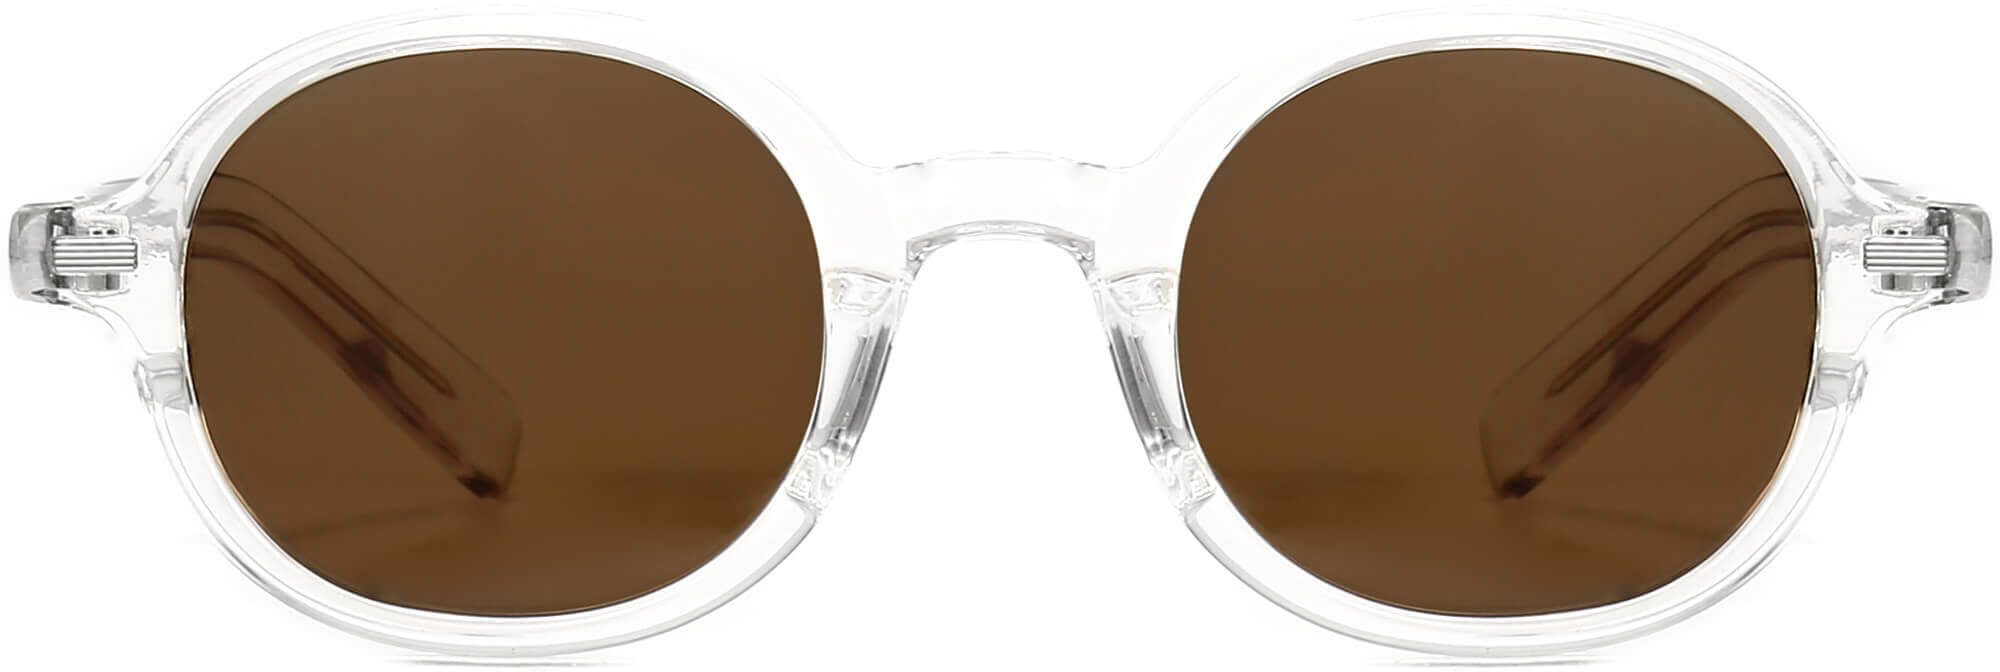 Timothy Clear Plastic Sunglasses from ANRRI, front view